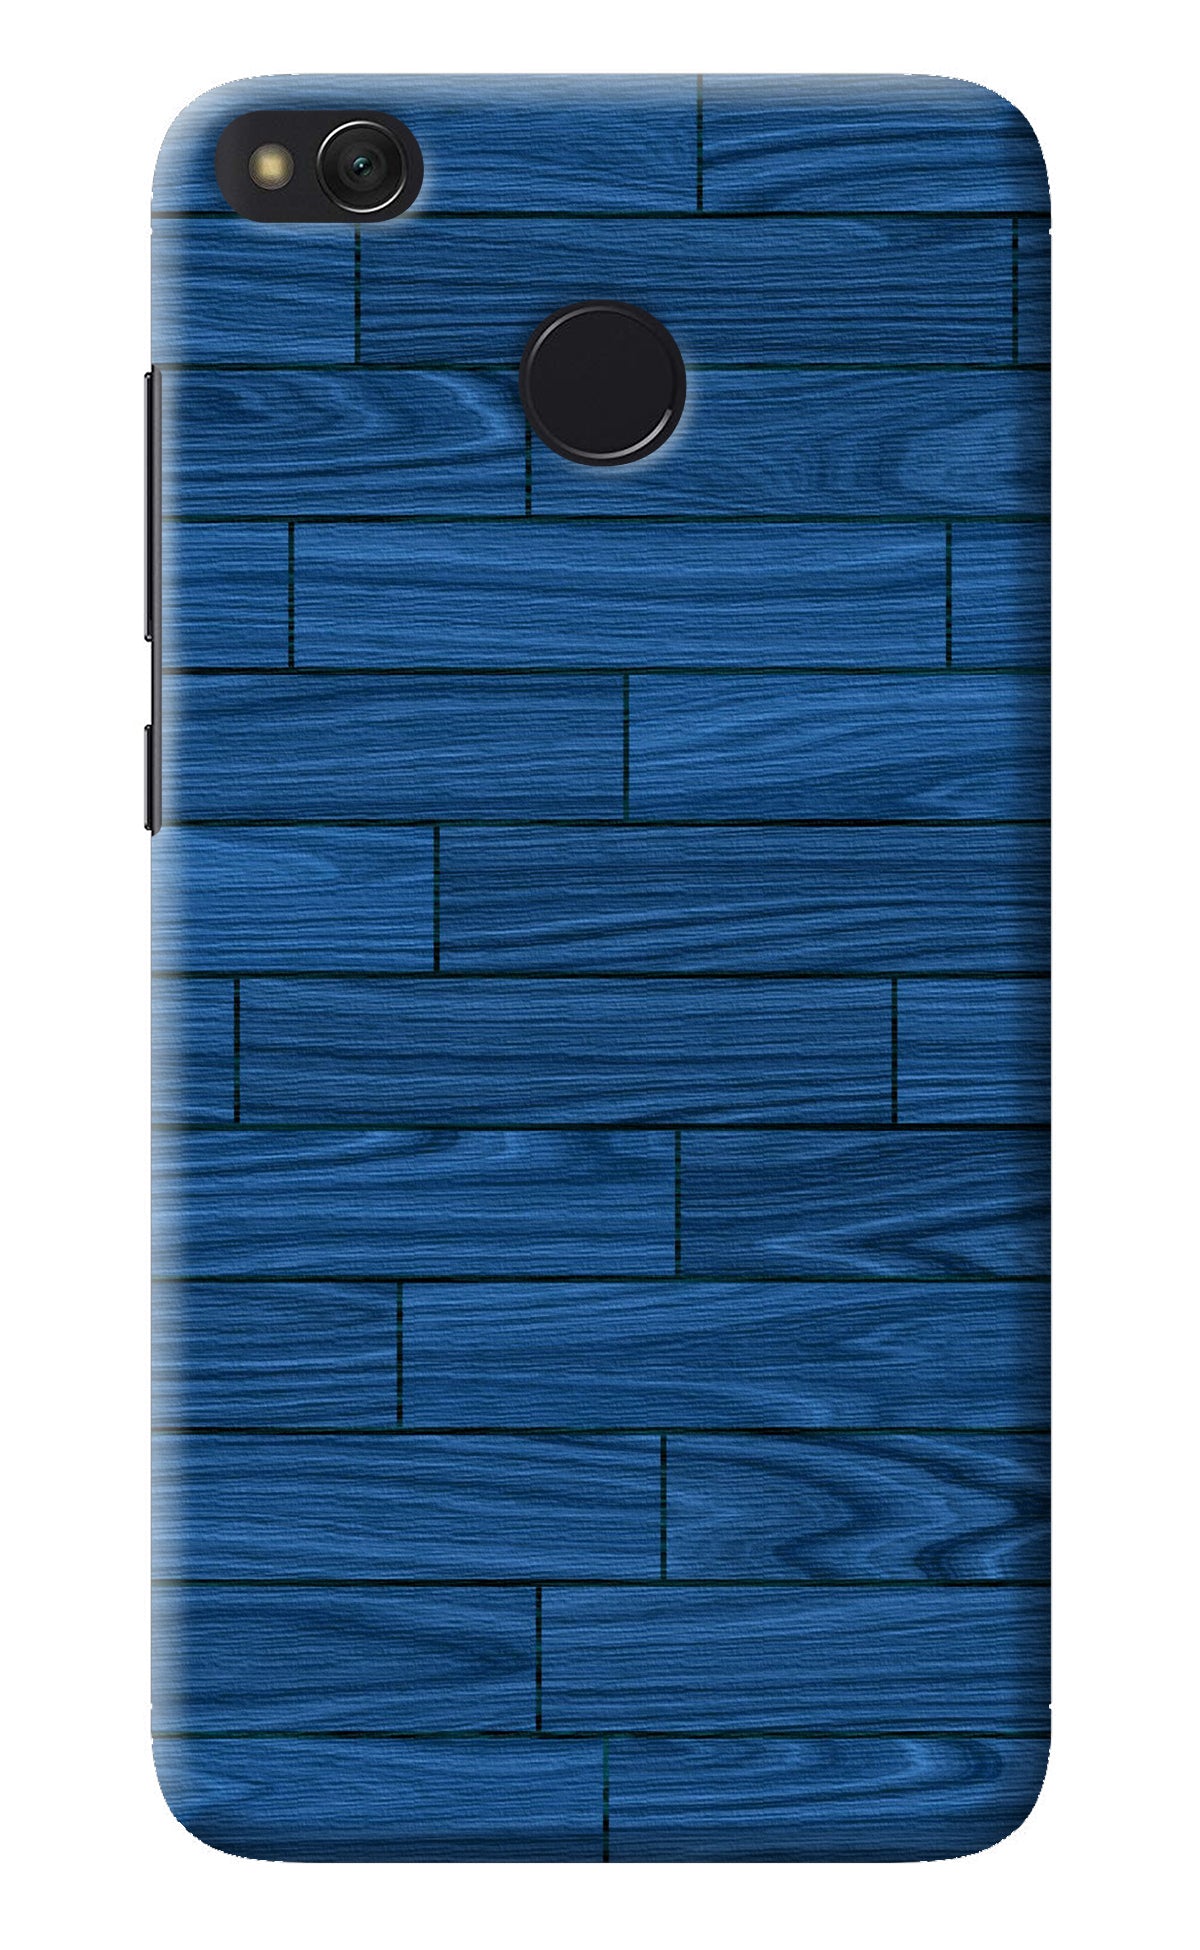 Wooden Texture Redmi 4 Back Cover